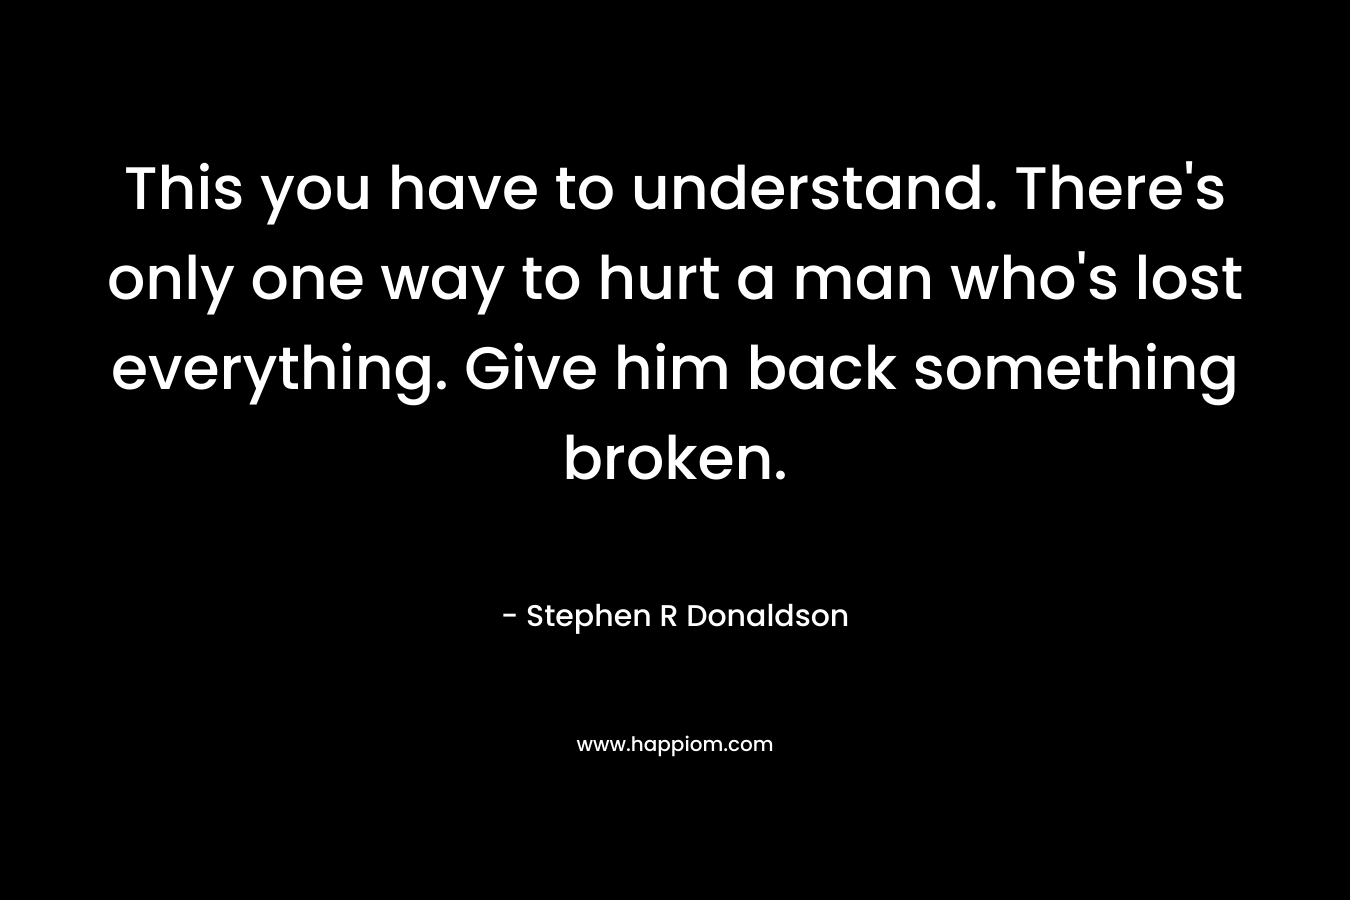 This you have to understand. There’s only one way to hurt a man who’s lost everything. Give him back something broken. – Stephen R Donaldson